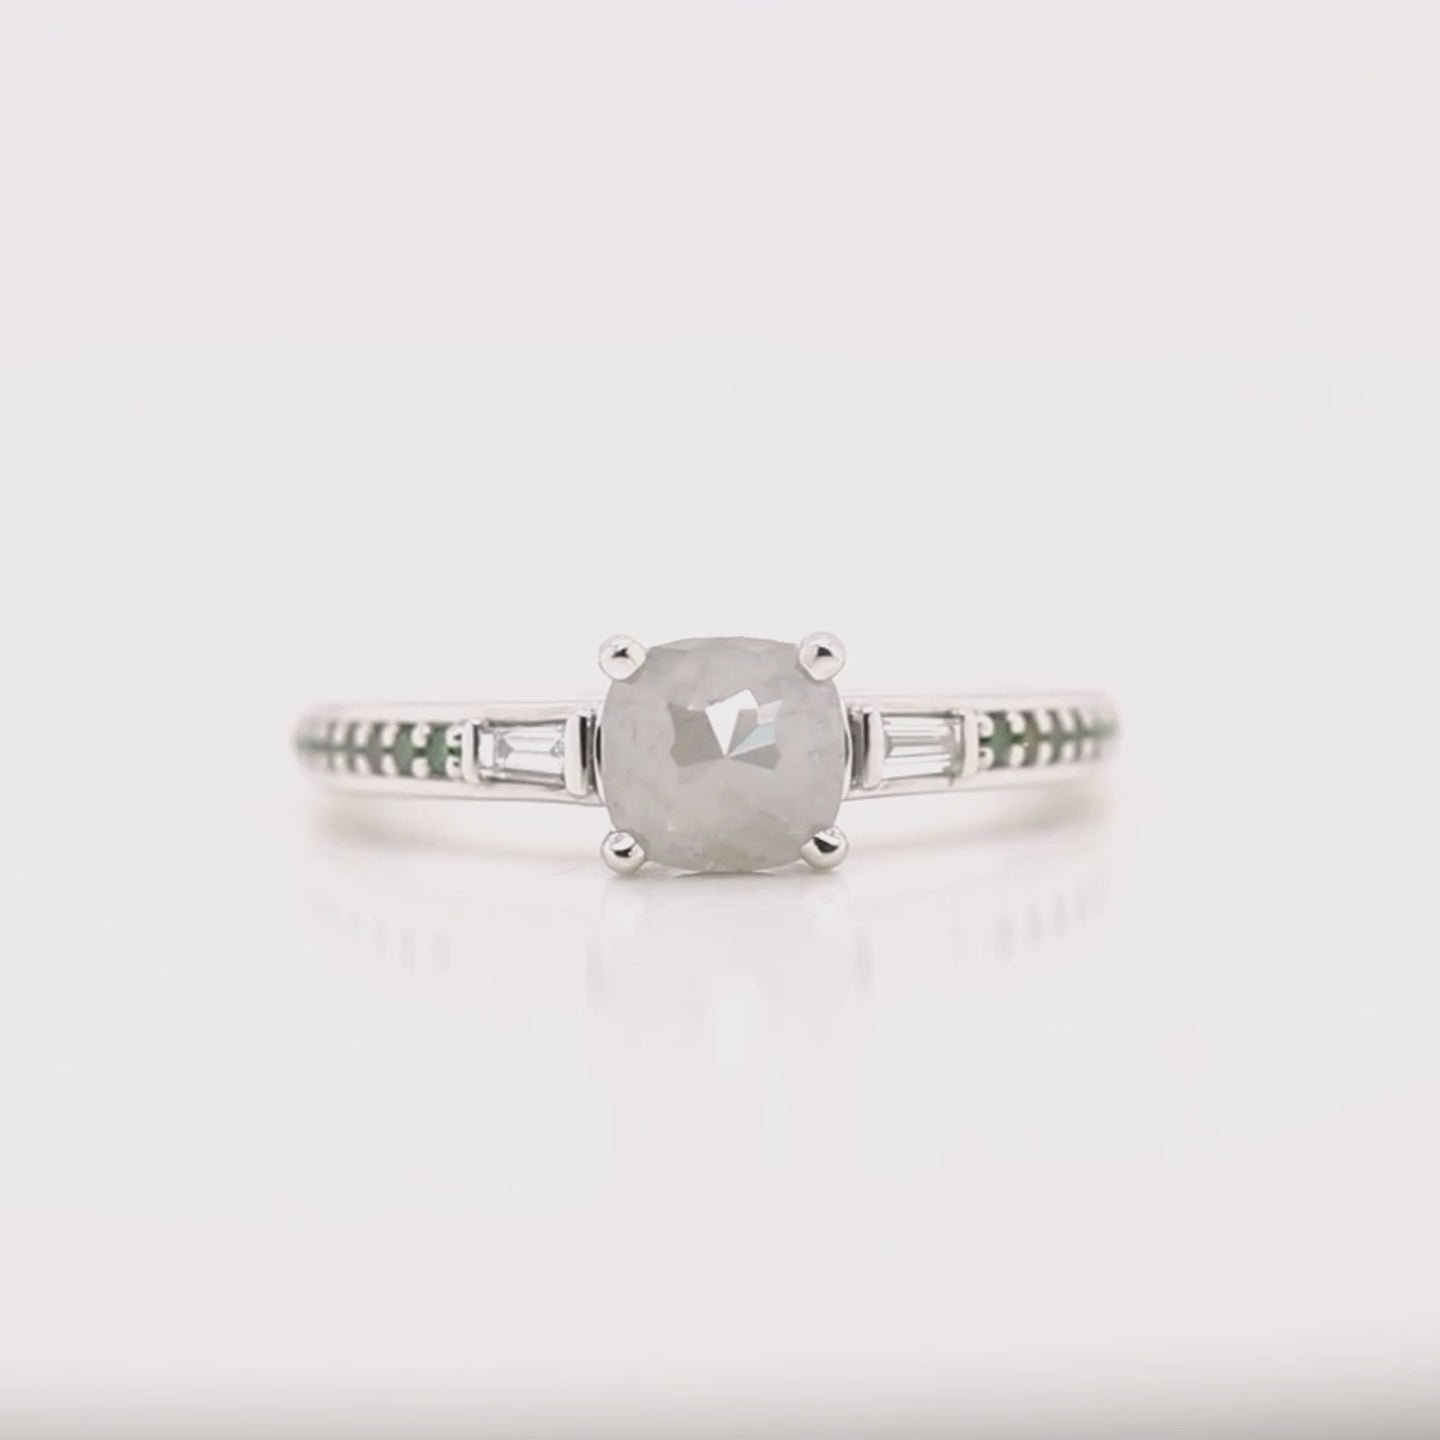 Beckett Ring with a 0.80 Carat Misty Gray Cushion Cut Salt and Pepper Diamond and Green Accent Diamonds in 14k White Gold - Ready to Size and Ship